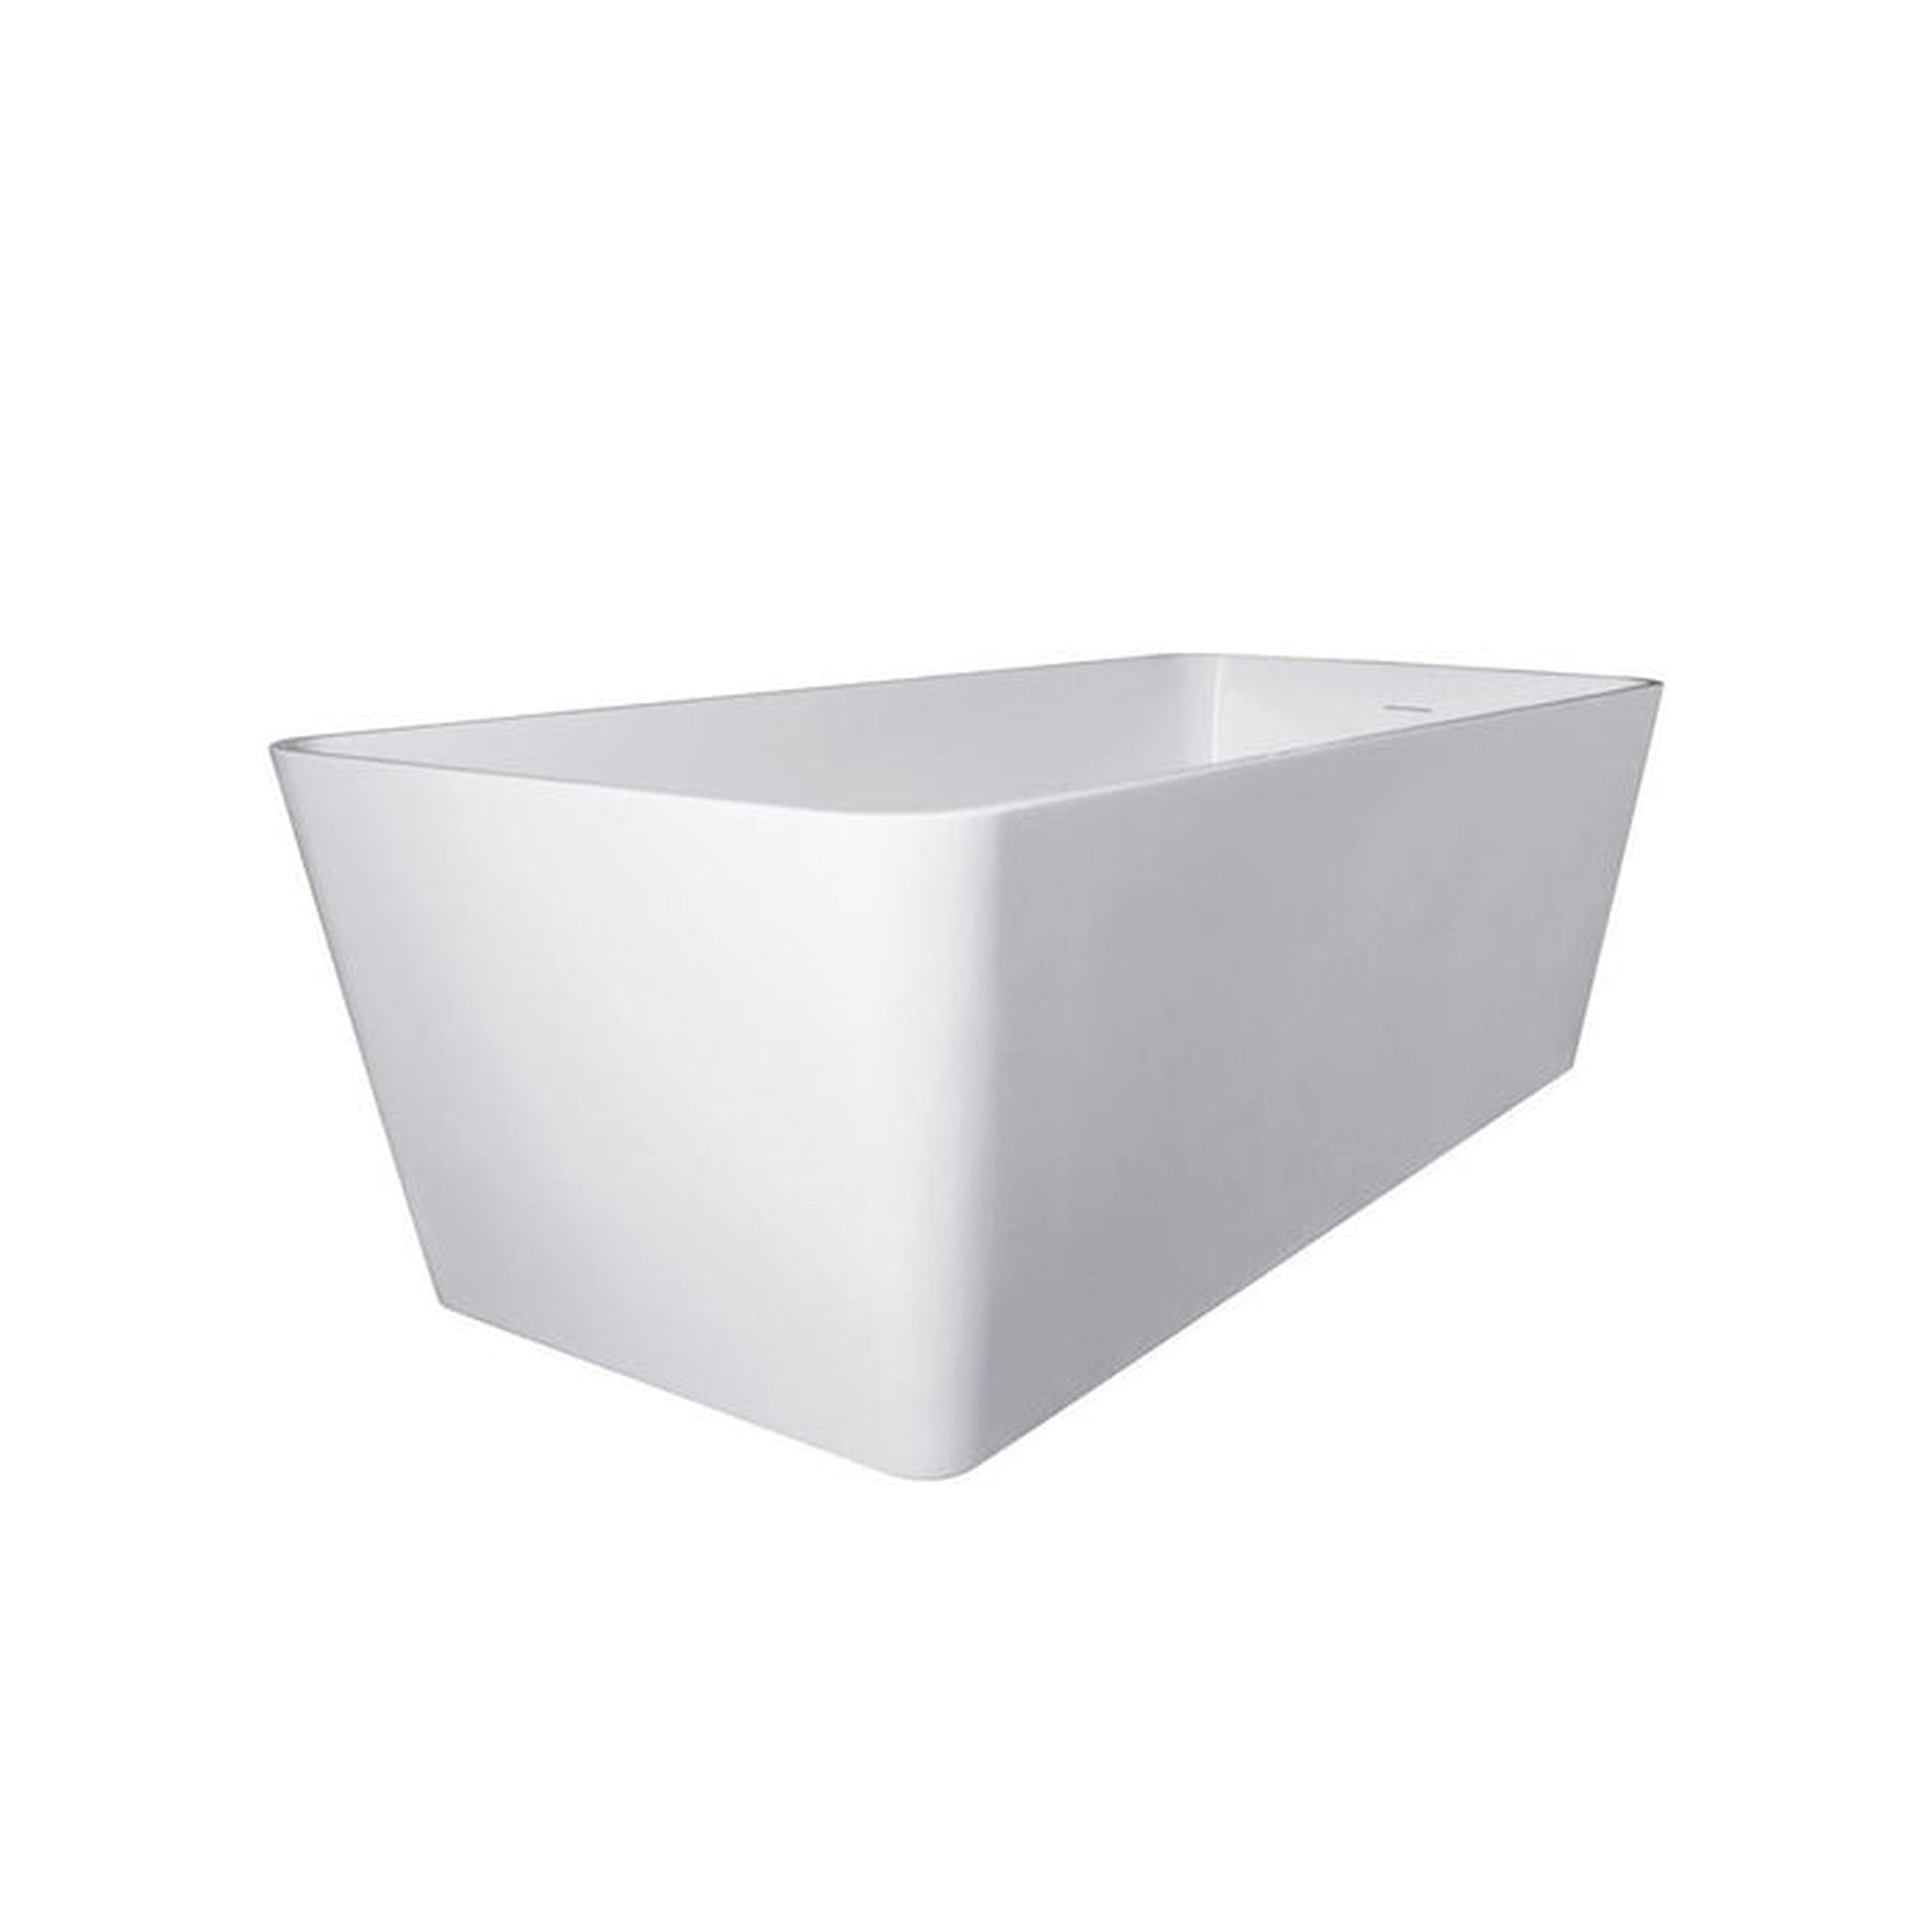 Vanity Art 59" Matte White Solid Surface Resin Stone Freestanding Soaking Tub With Slotted Overflow and Pop-up Drain